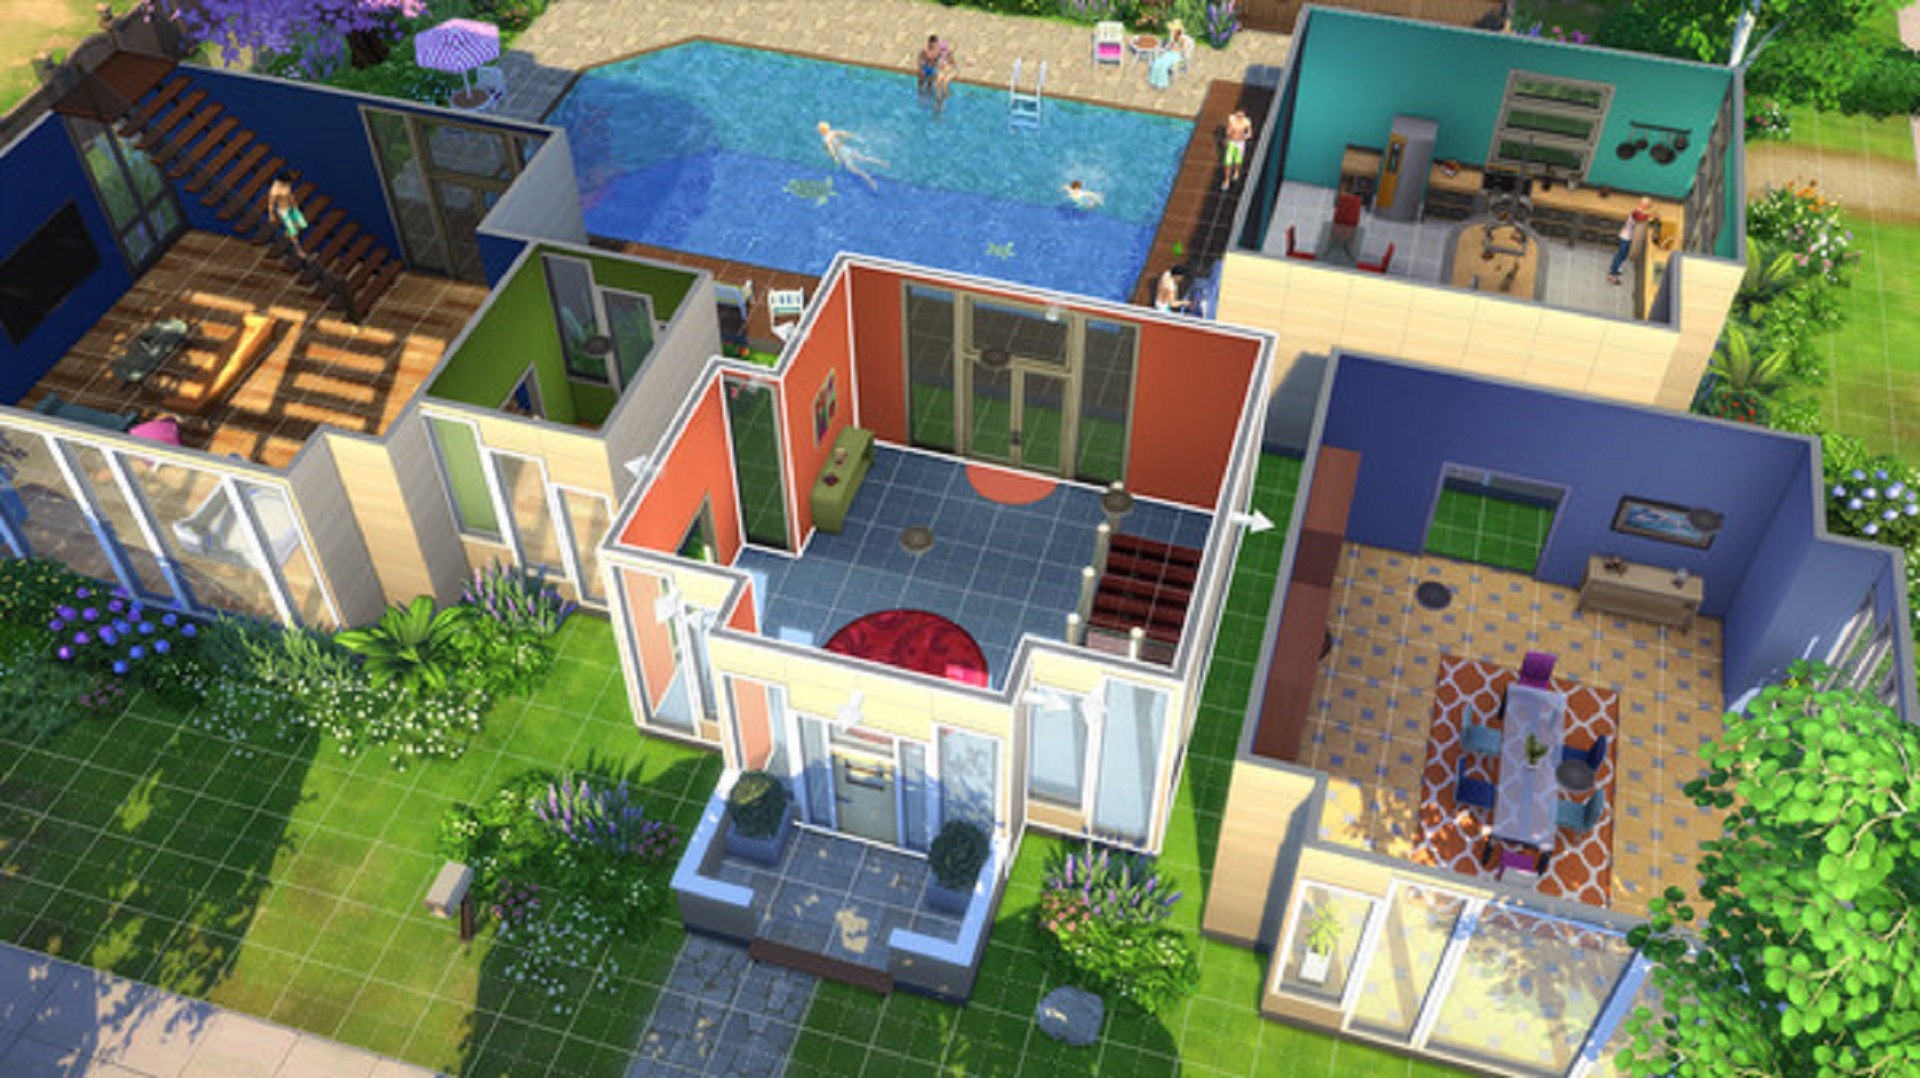 A house in The Sims 4 being edited in Build Mode.